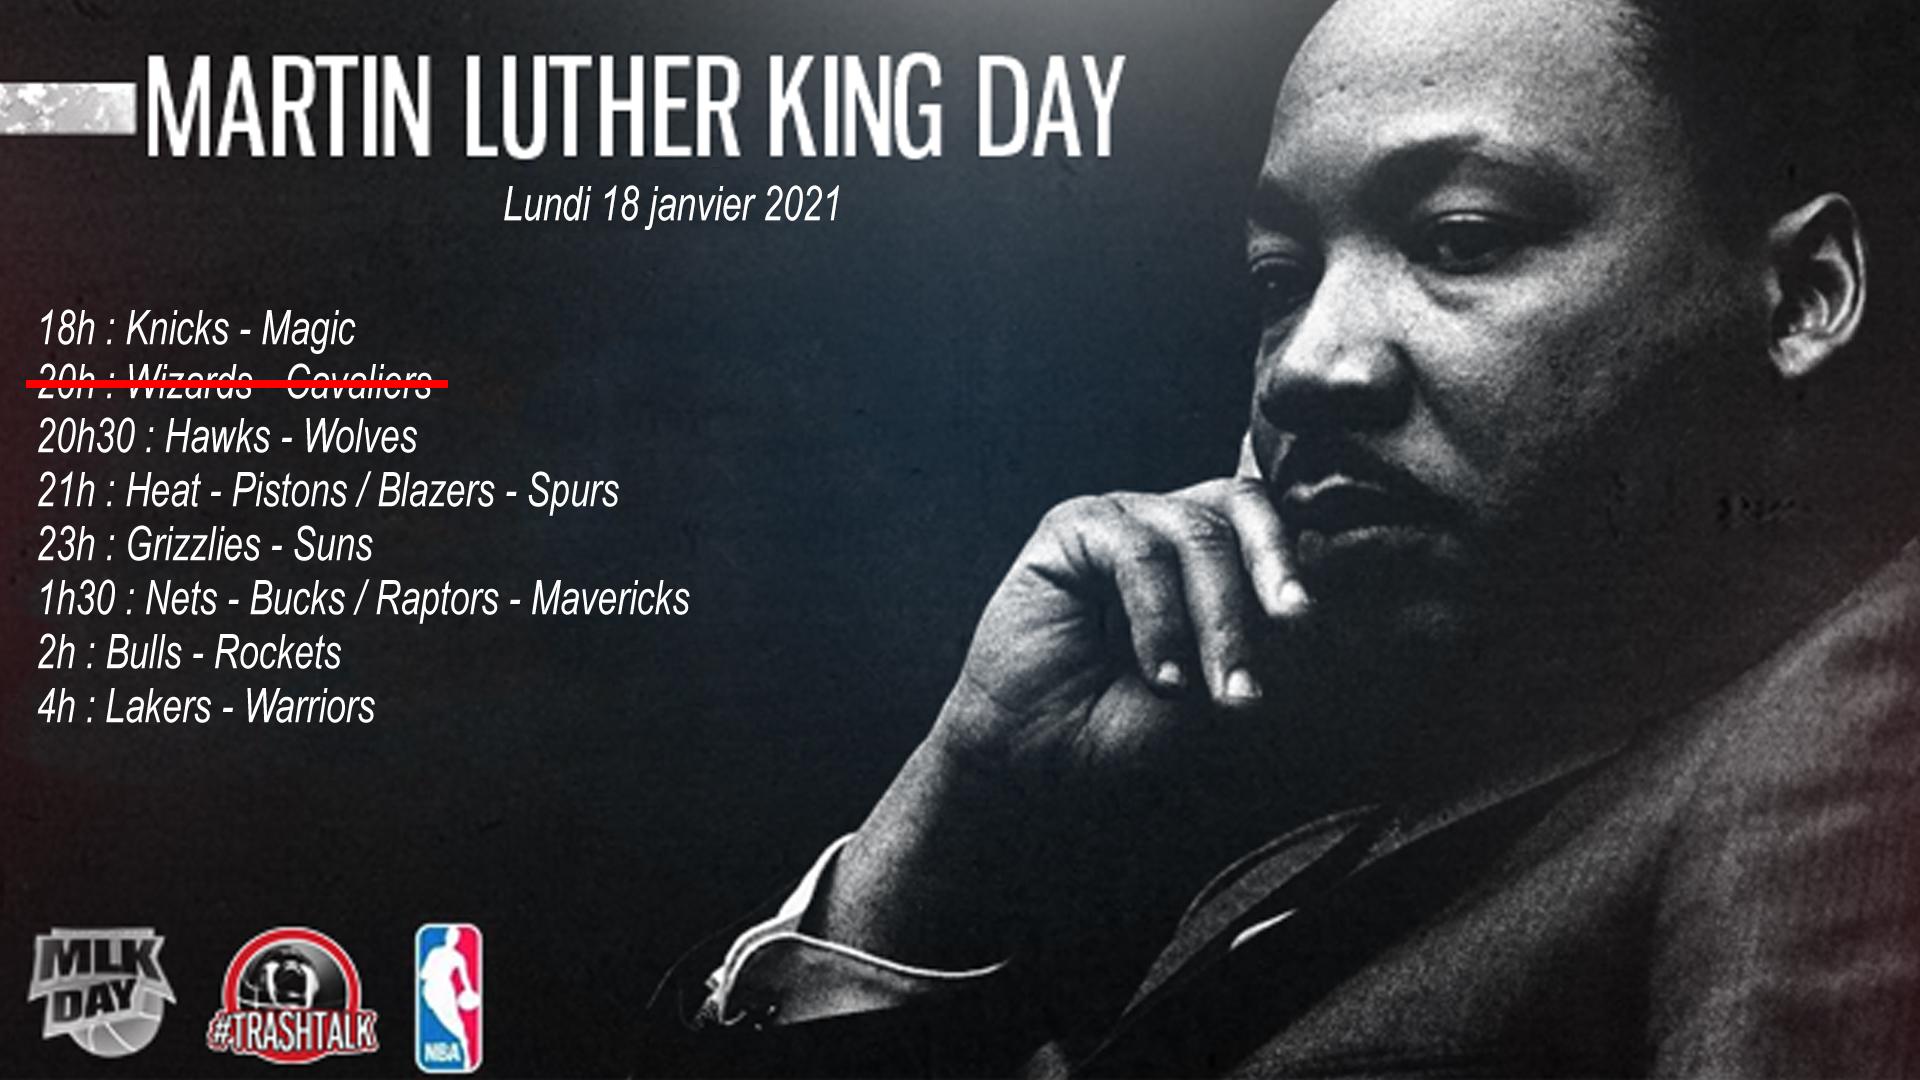 Article MLK Day 2021